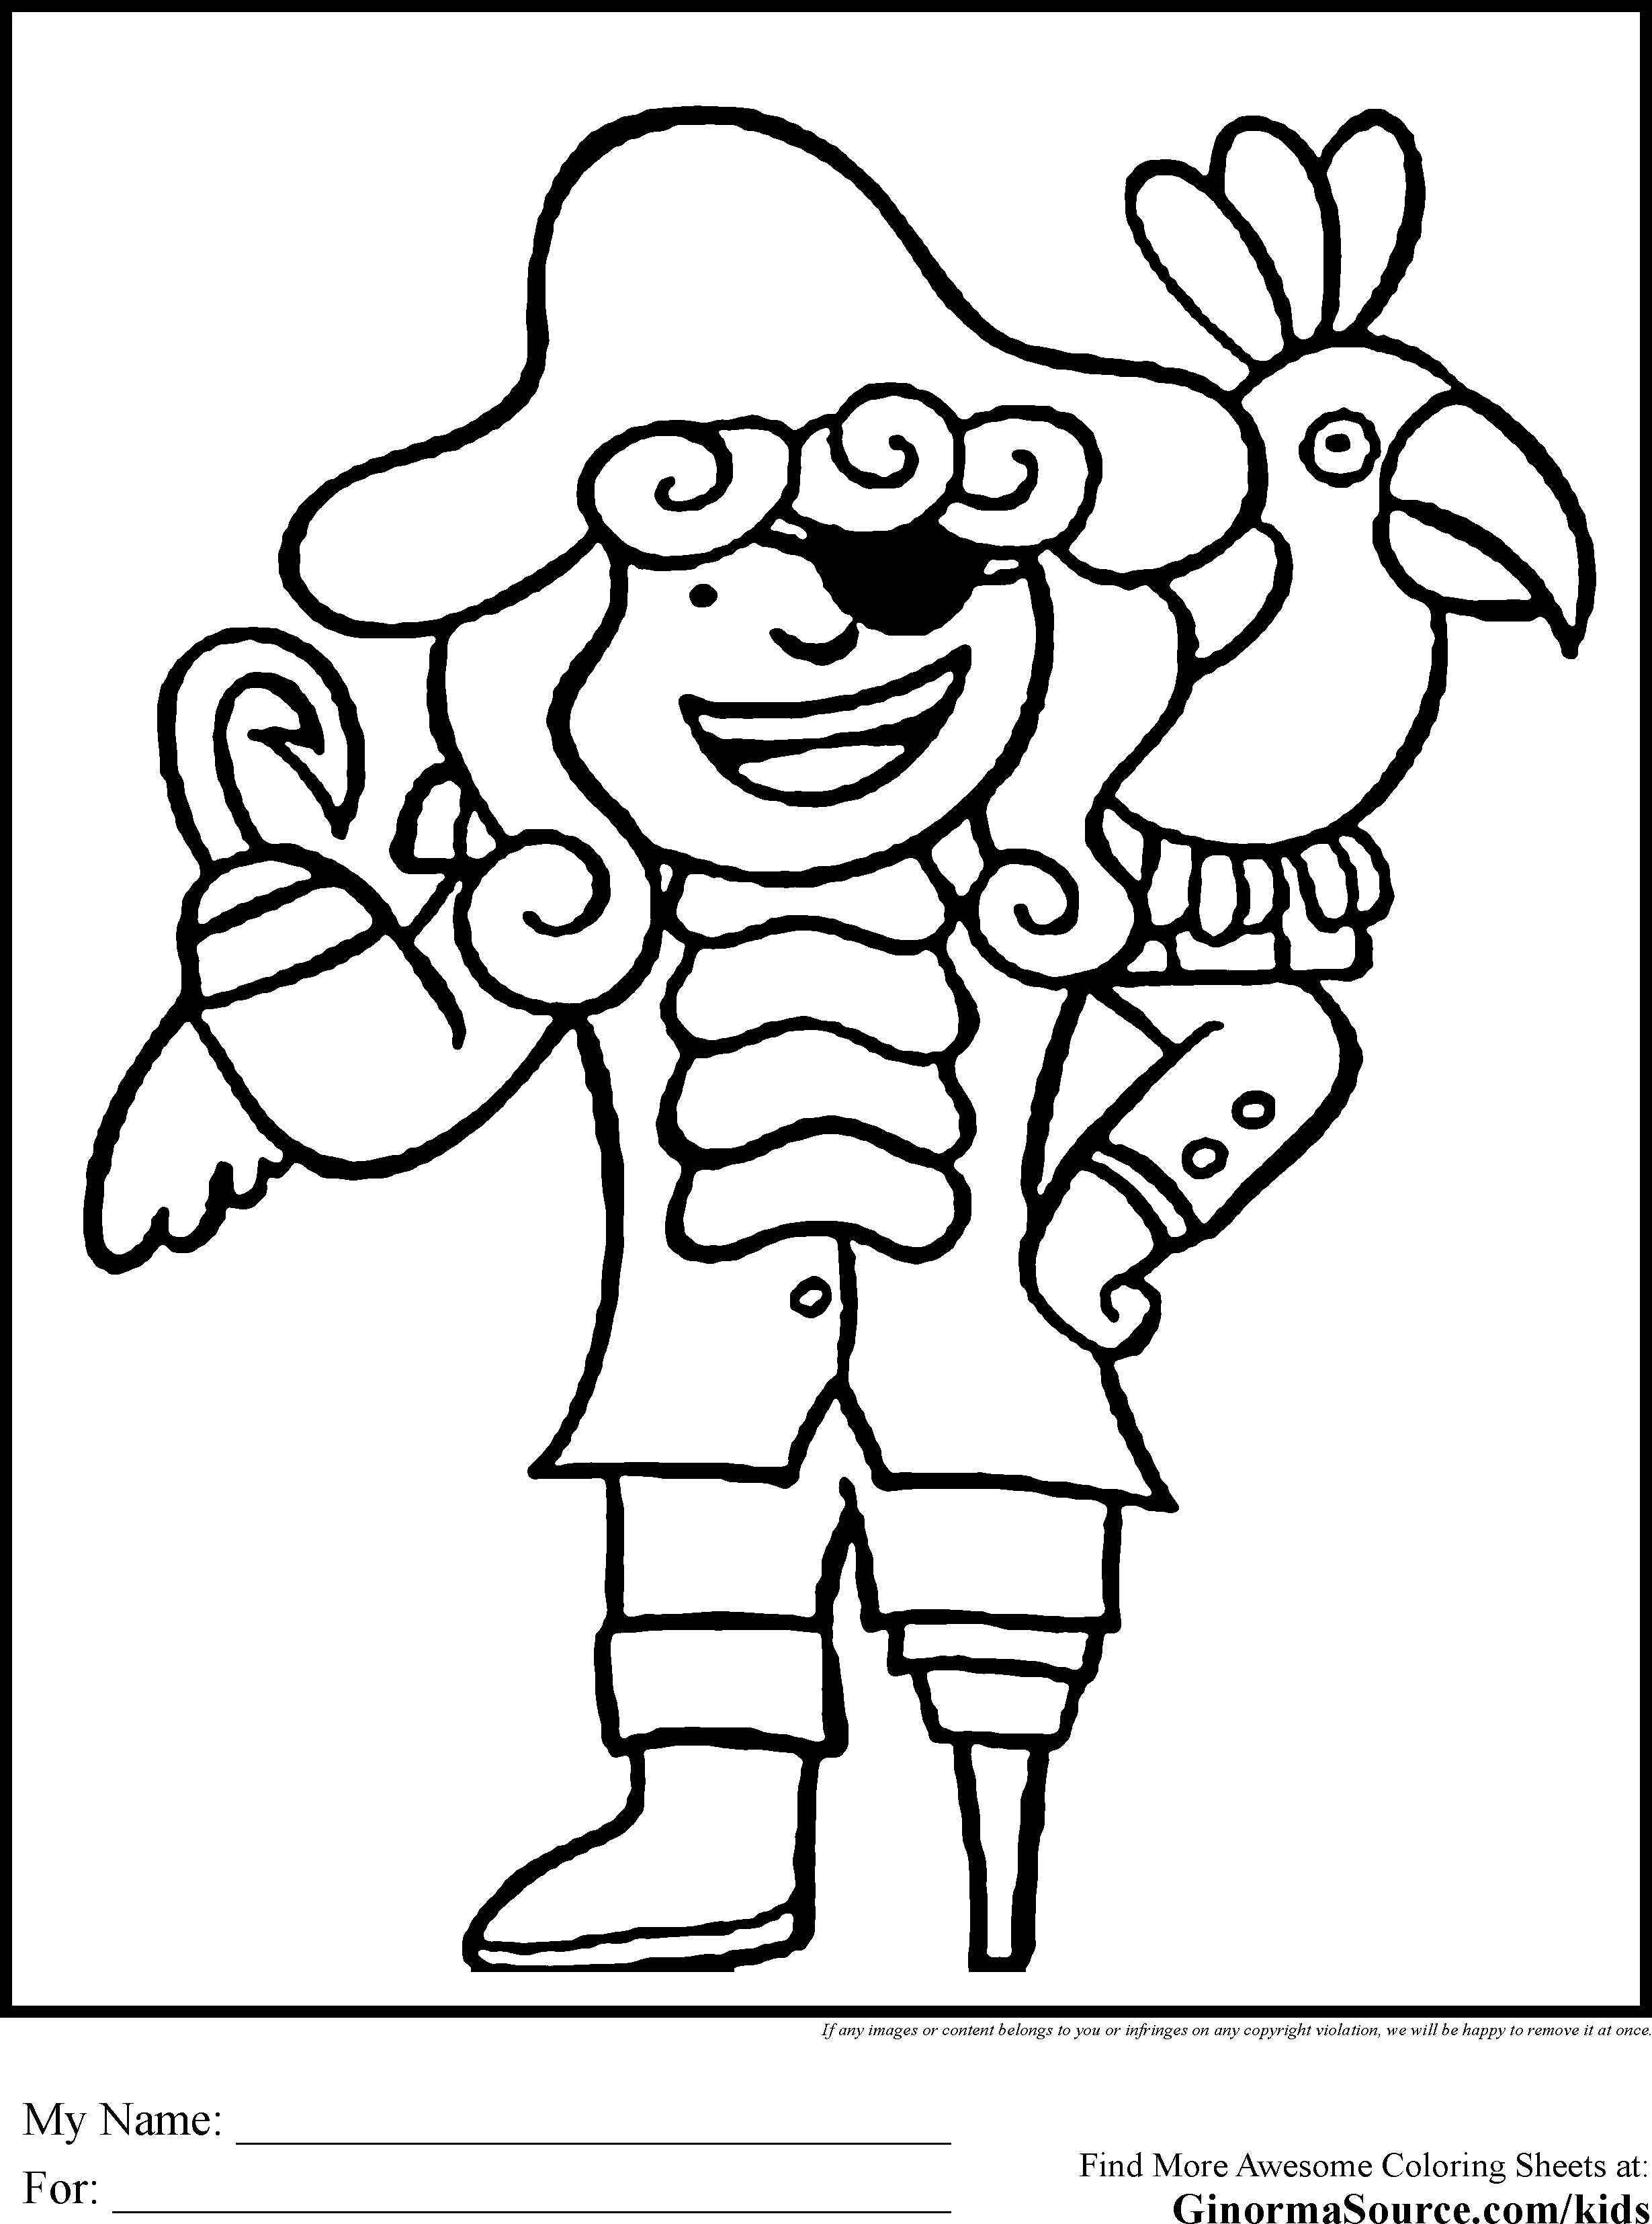 Coloring pages | Coloring pages ...